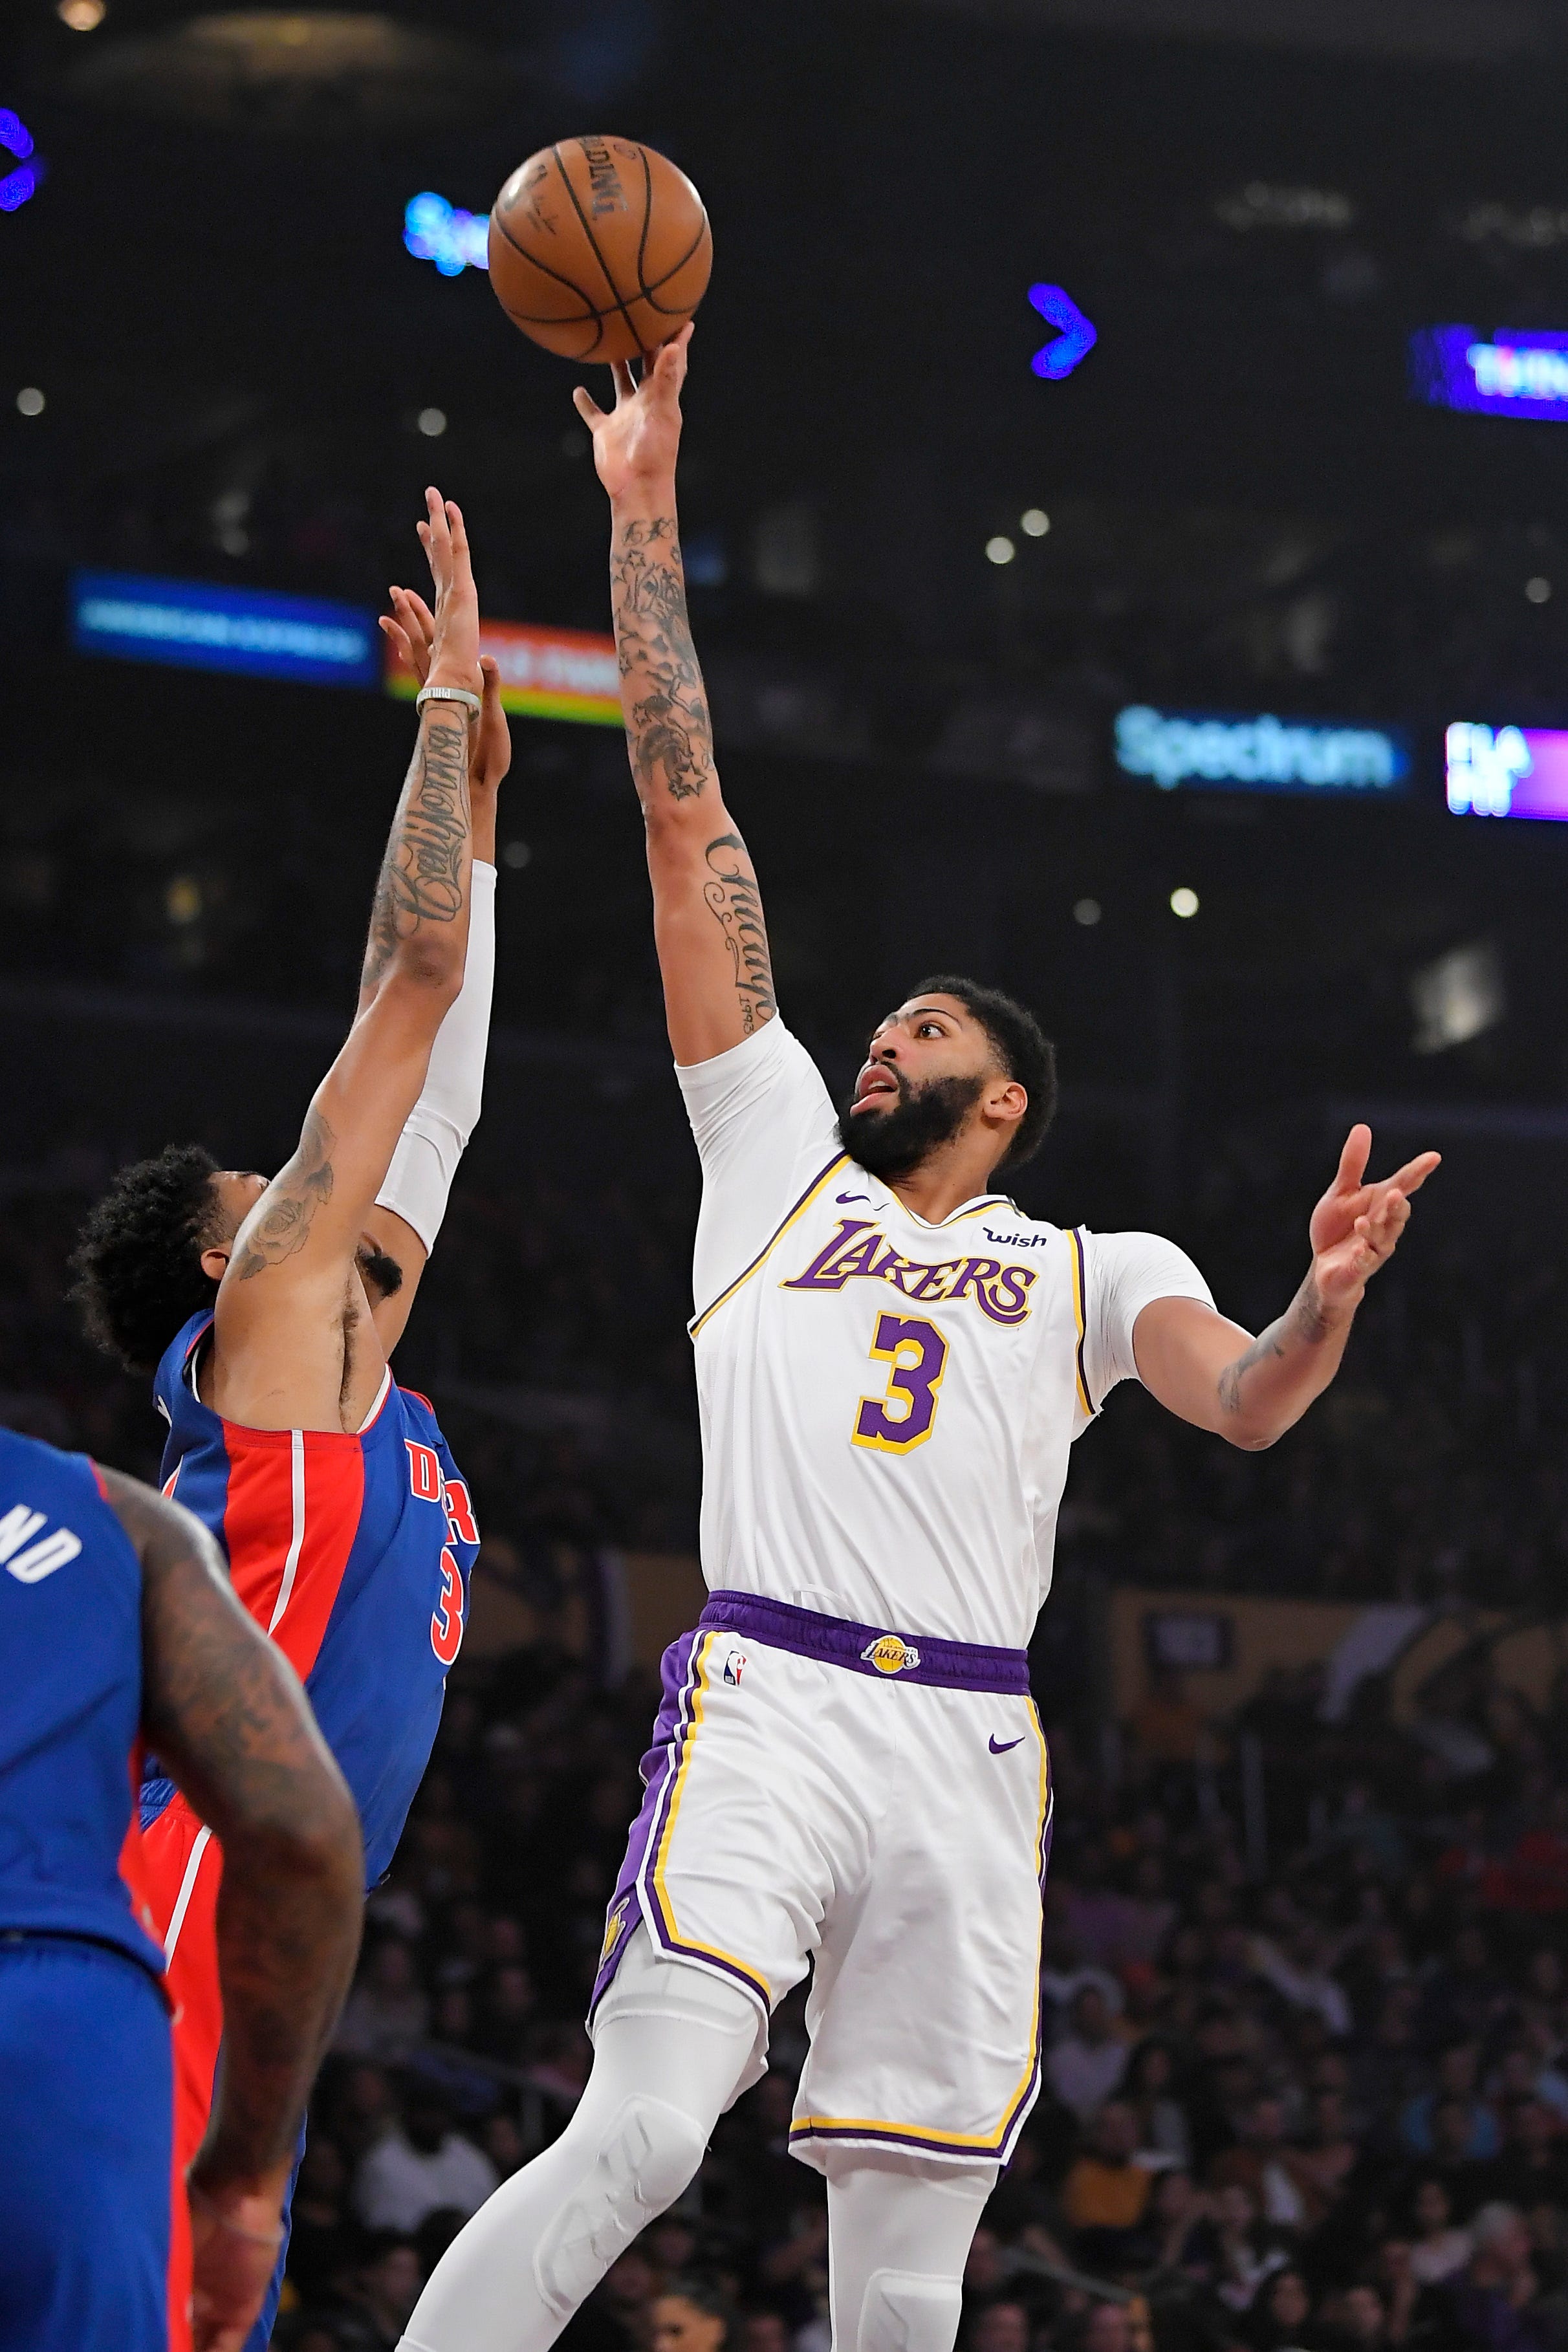 Los Angeles Lakers forward Anthony Davis, right, shoots as Detroit Pistons forward Christian Wood defends during the first half.